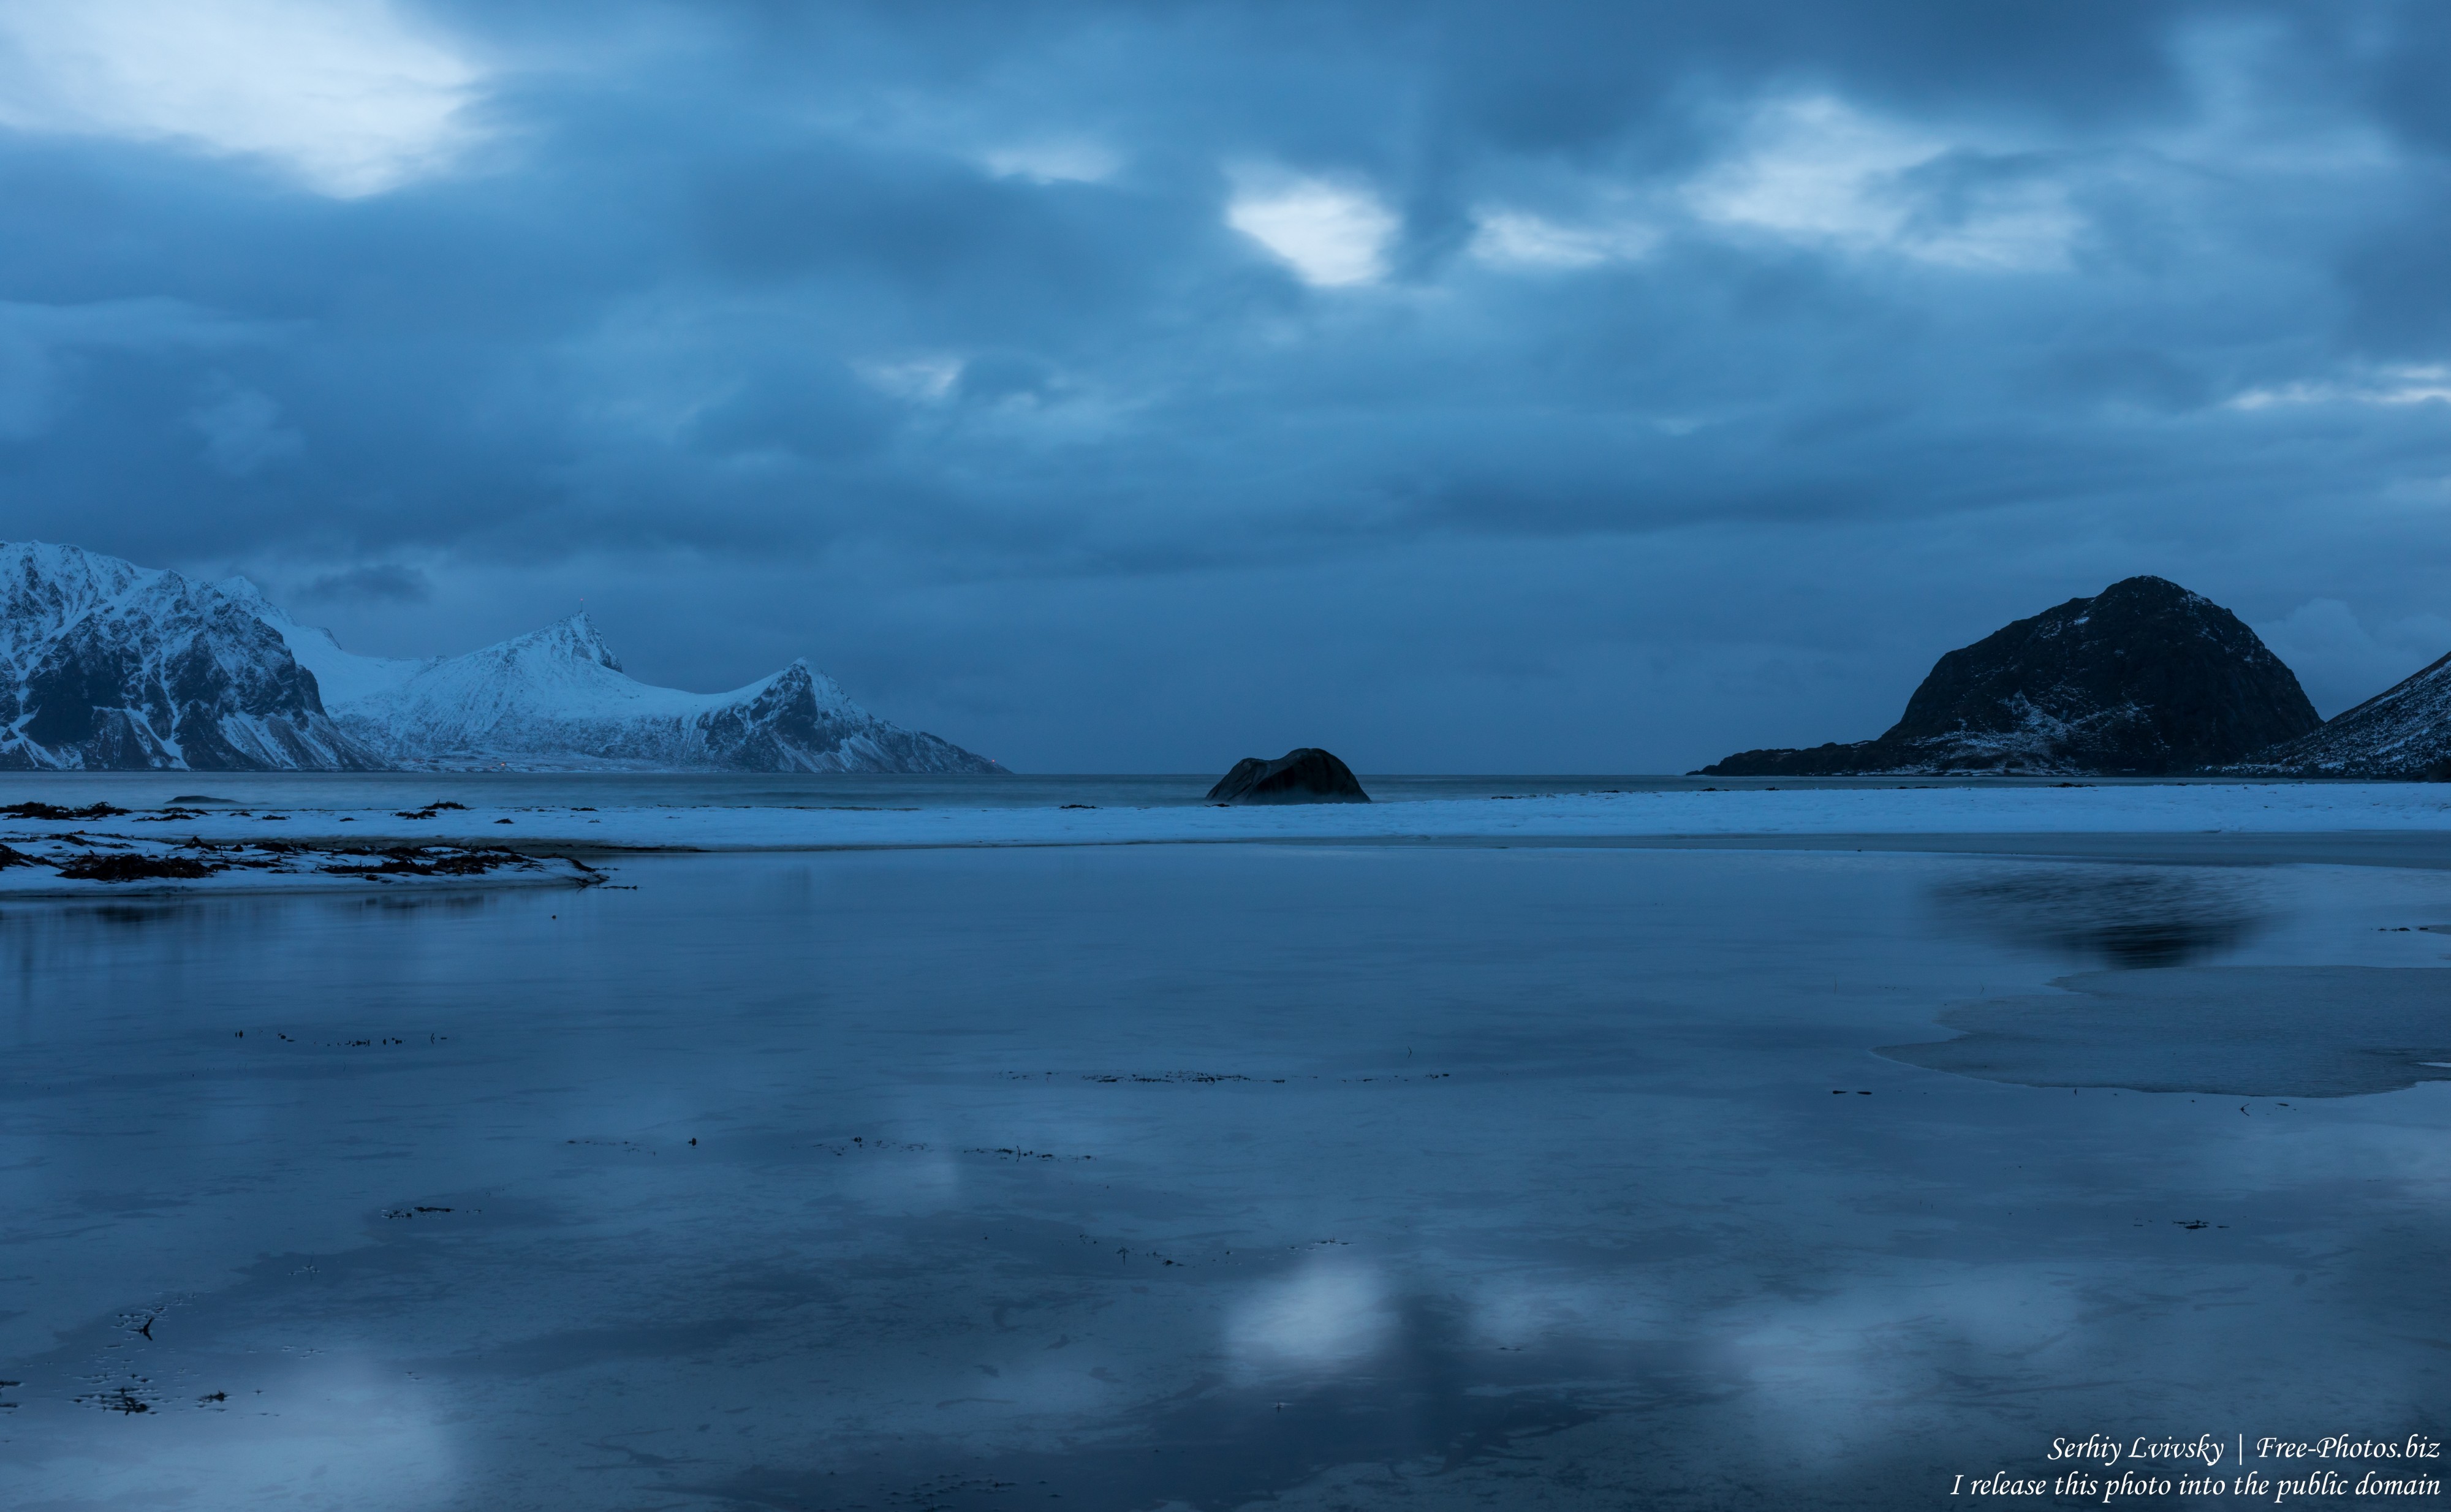 Haukland beach, Norway, in February 2020, photographed by Serhiy Lvivsky, picture 1